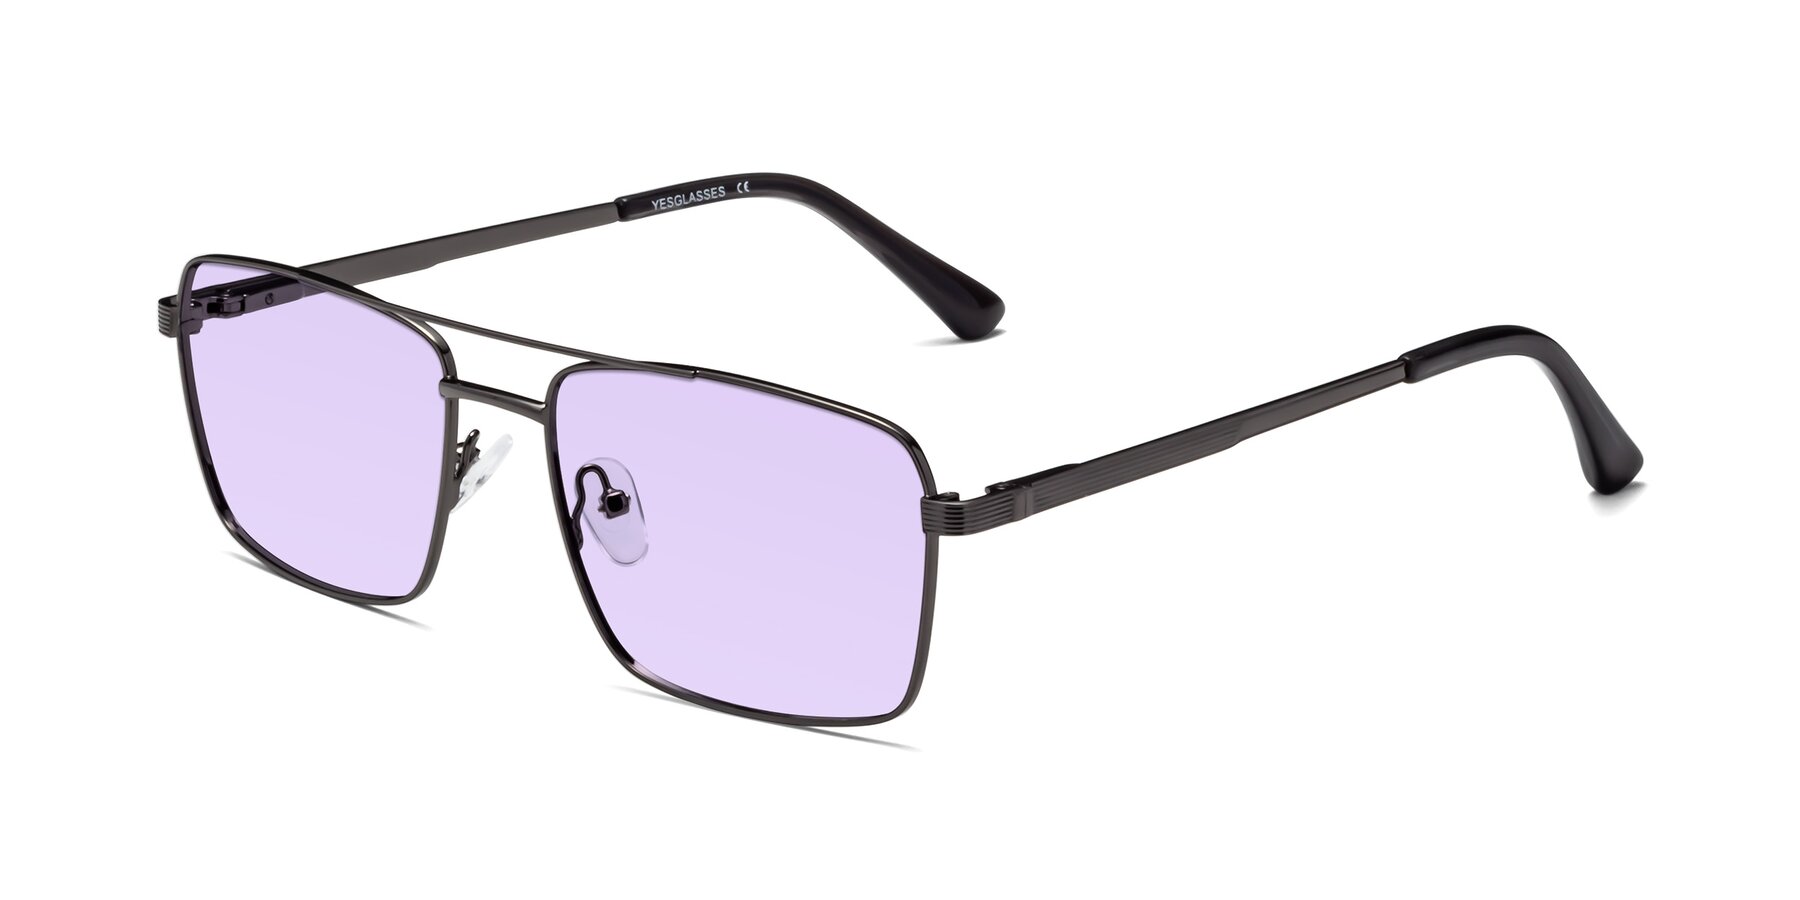 Angle of Beckum in Gunmetal with Light Purple Tinted Lenses